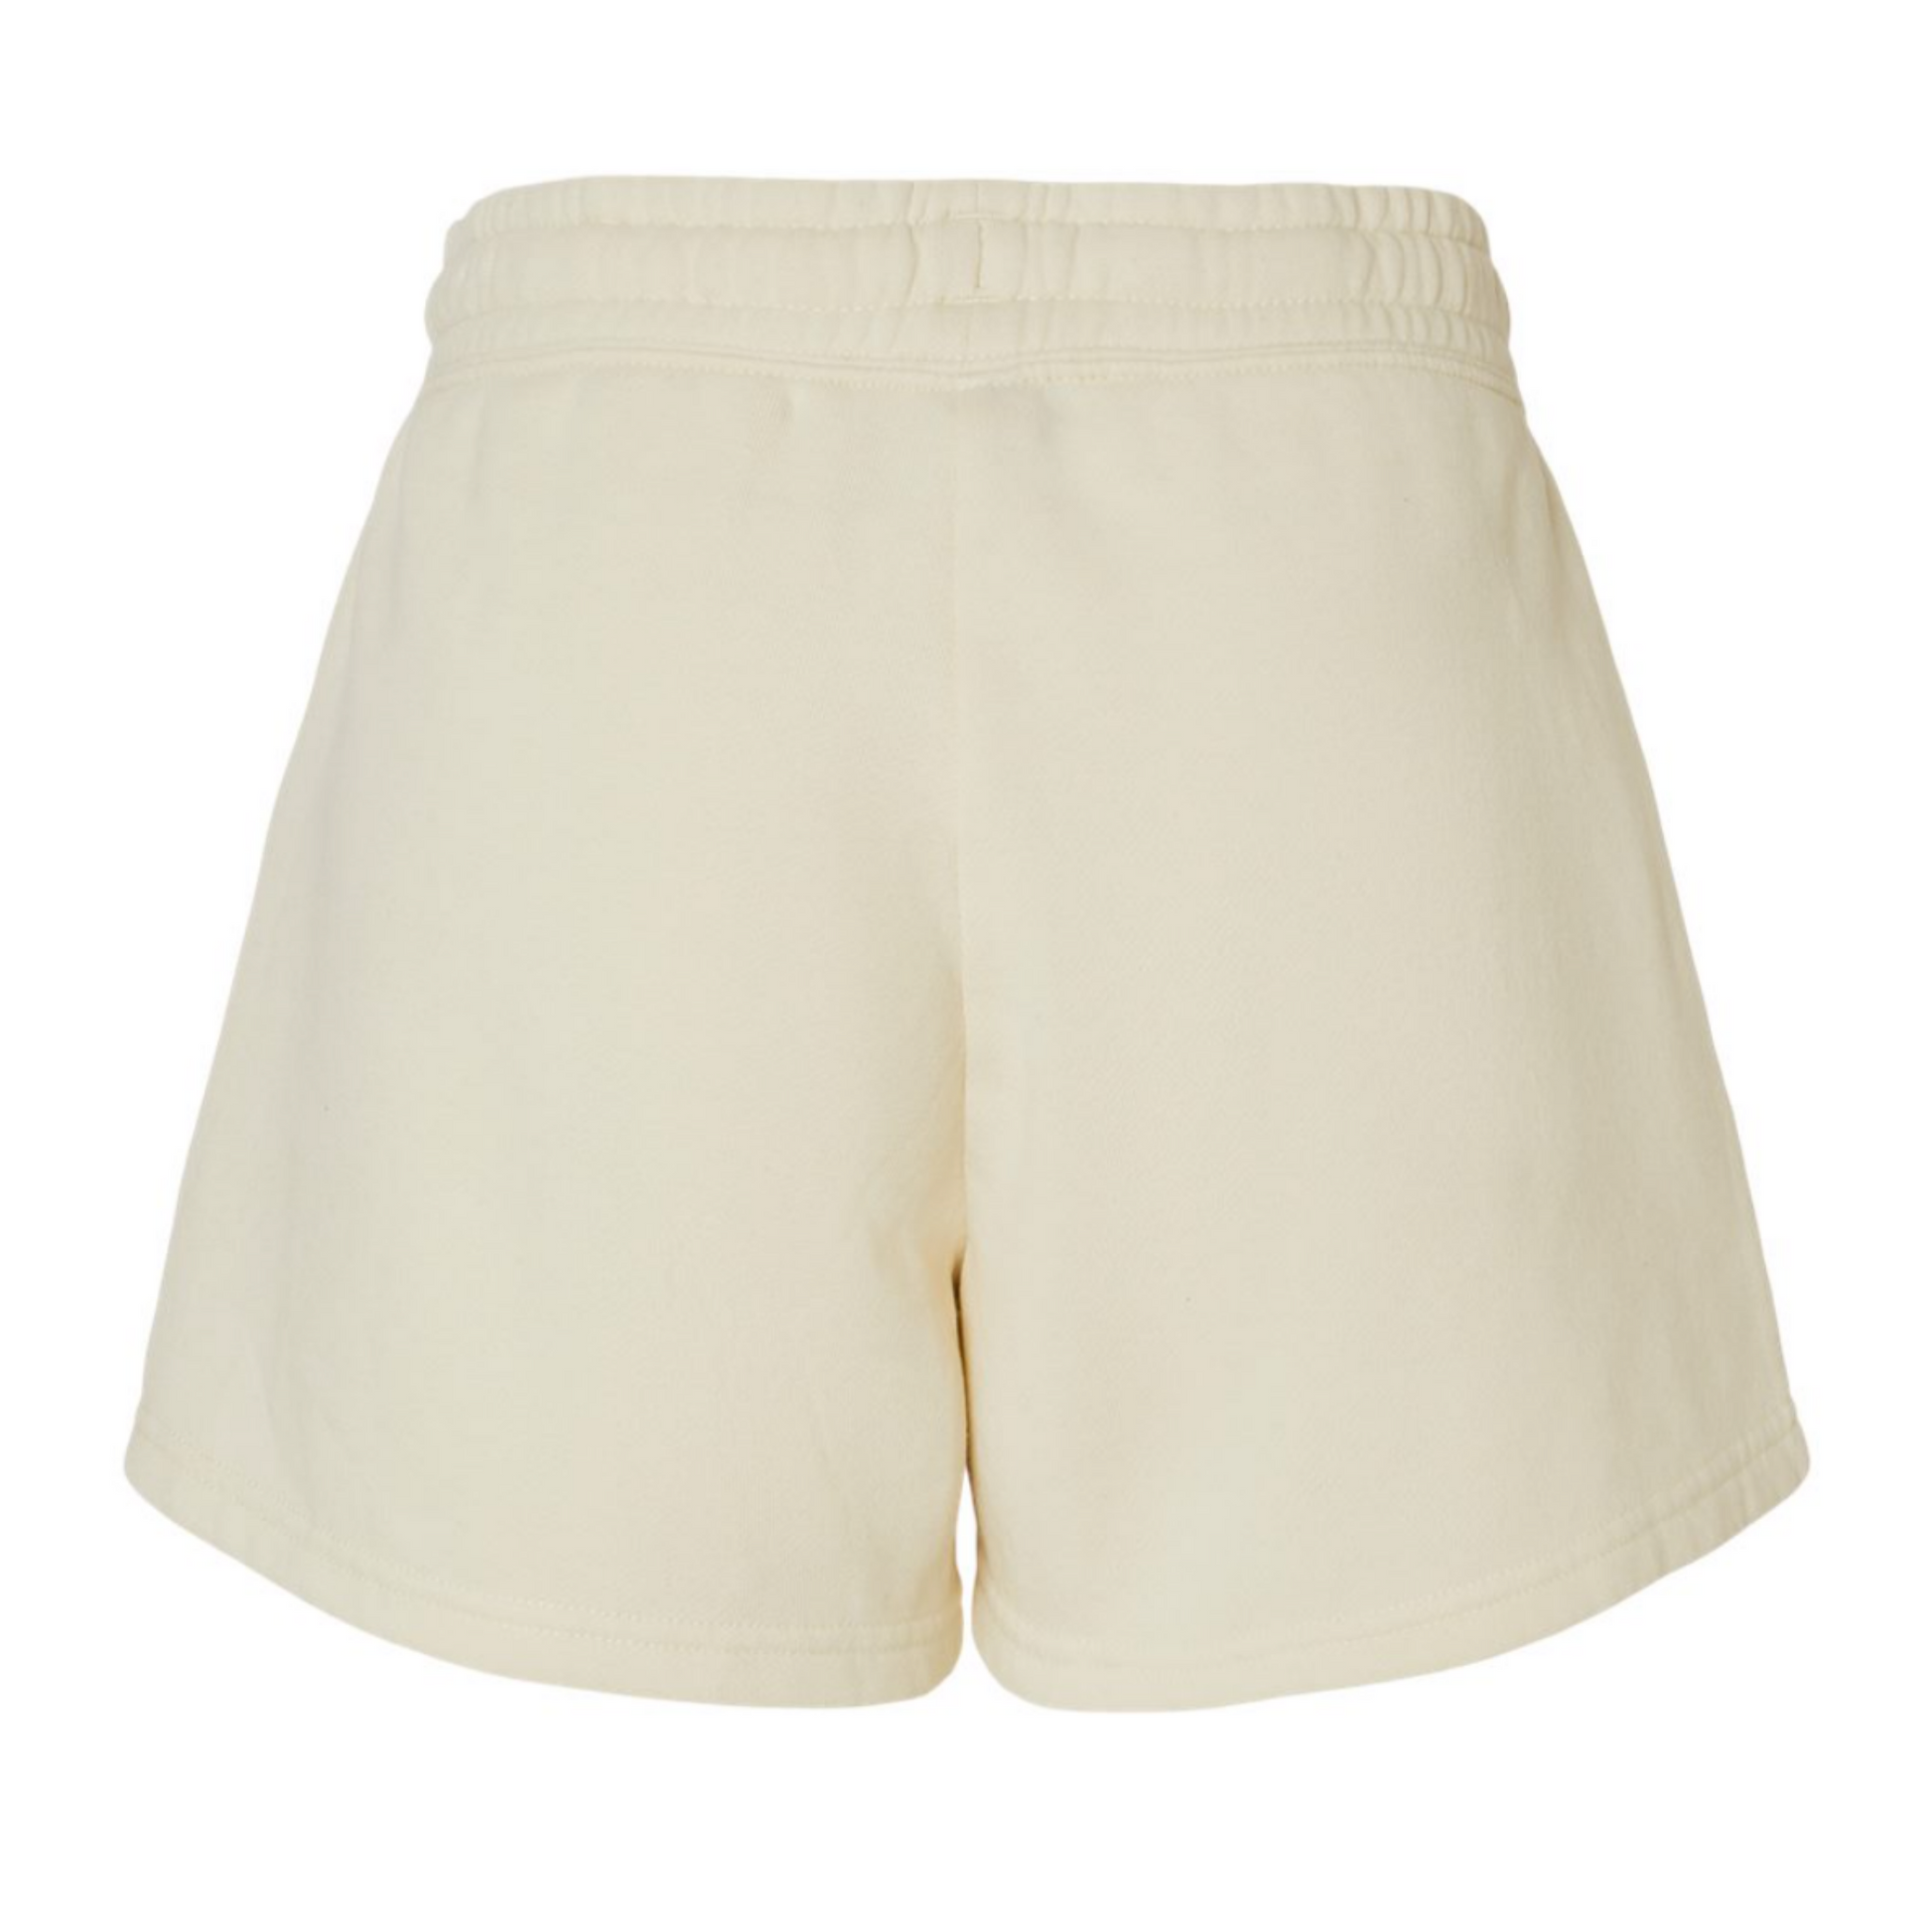 Mama Shorts in cream with a comfy warm fabric. Draw strings loop the front and small emblem of "mama" is on the right hand side of the short in black - on the front. This is the back view of the shorts.